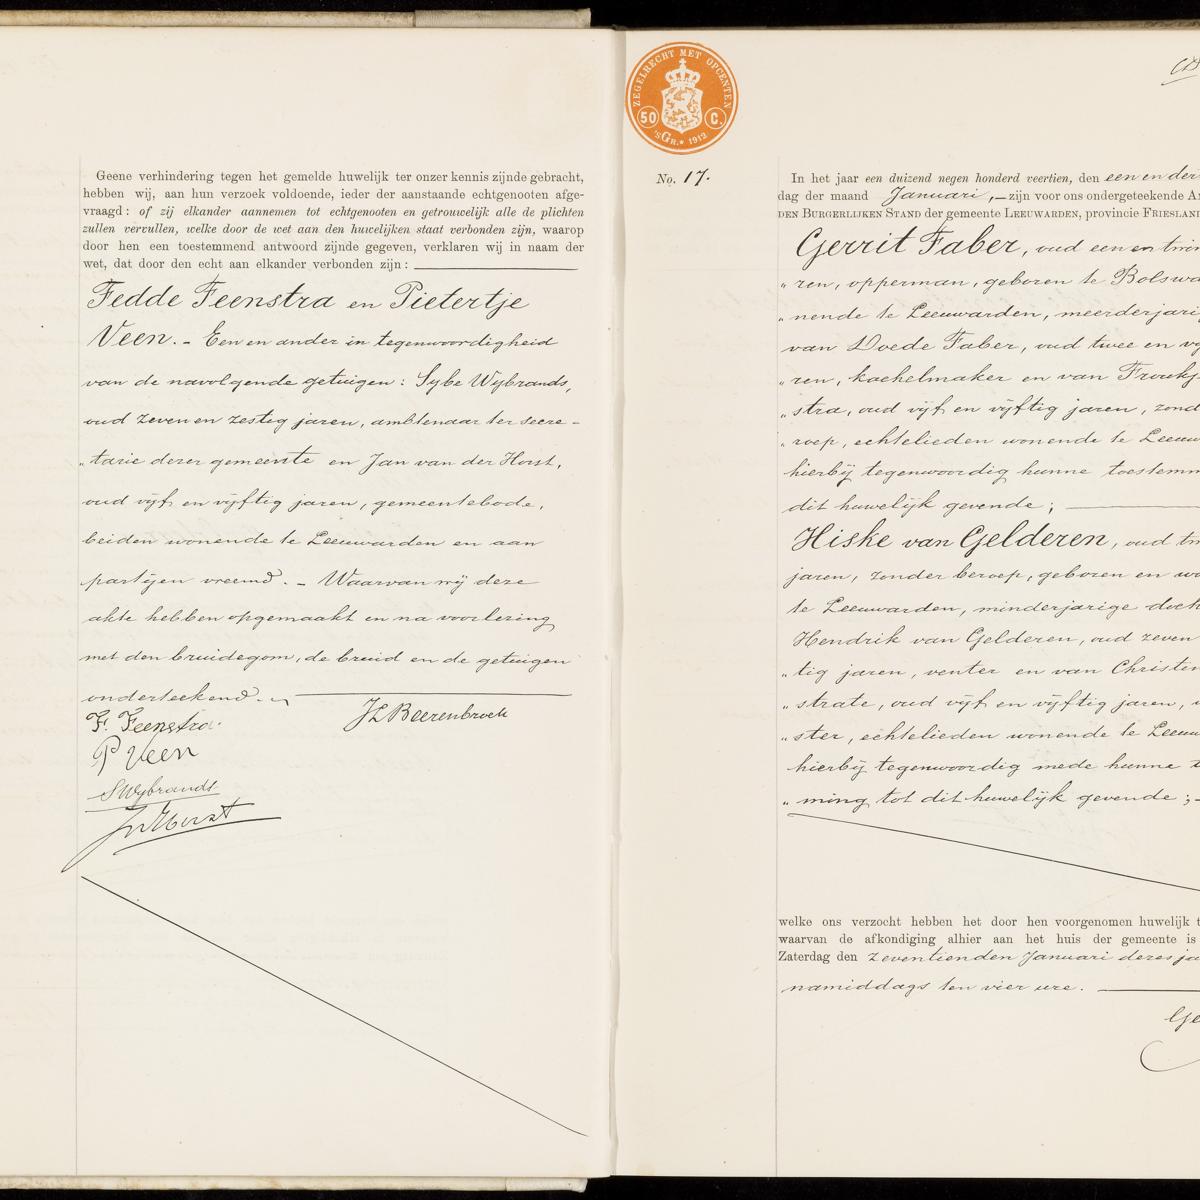 Civil registry of marriages, Leeuwarden, 1914, records 16-17